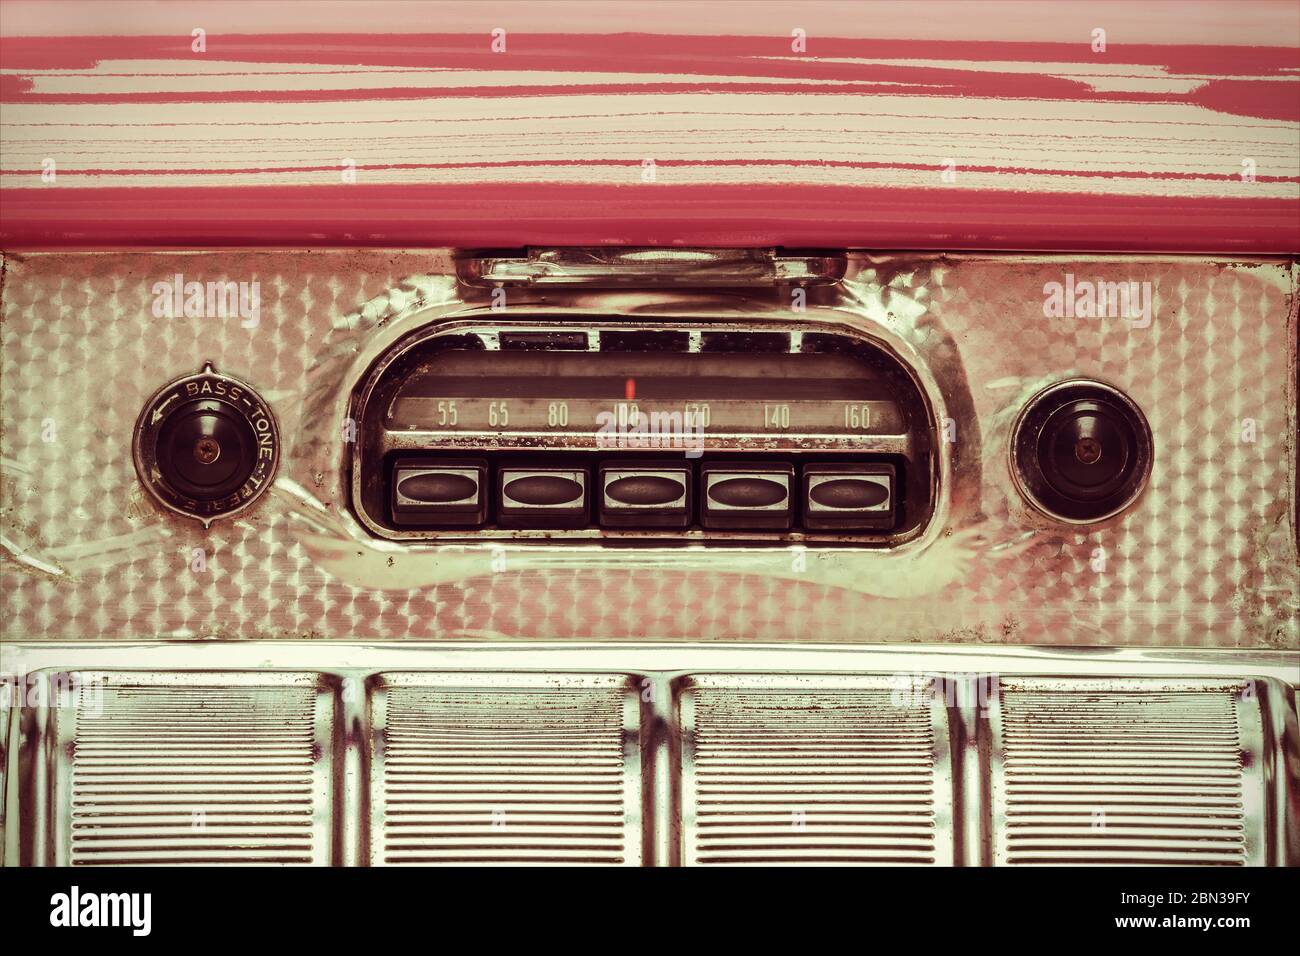 Retro styled image of an old car radio inside a pink classic car Stock Photo